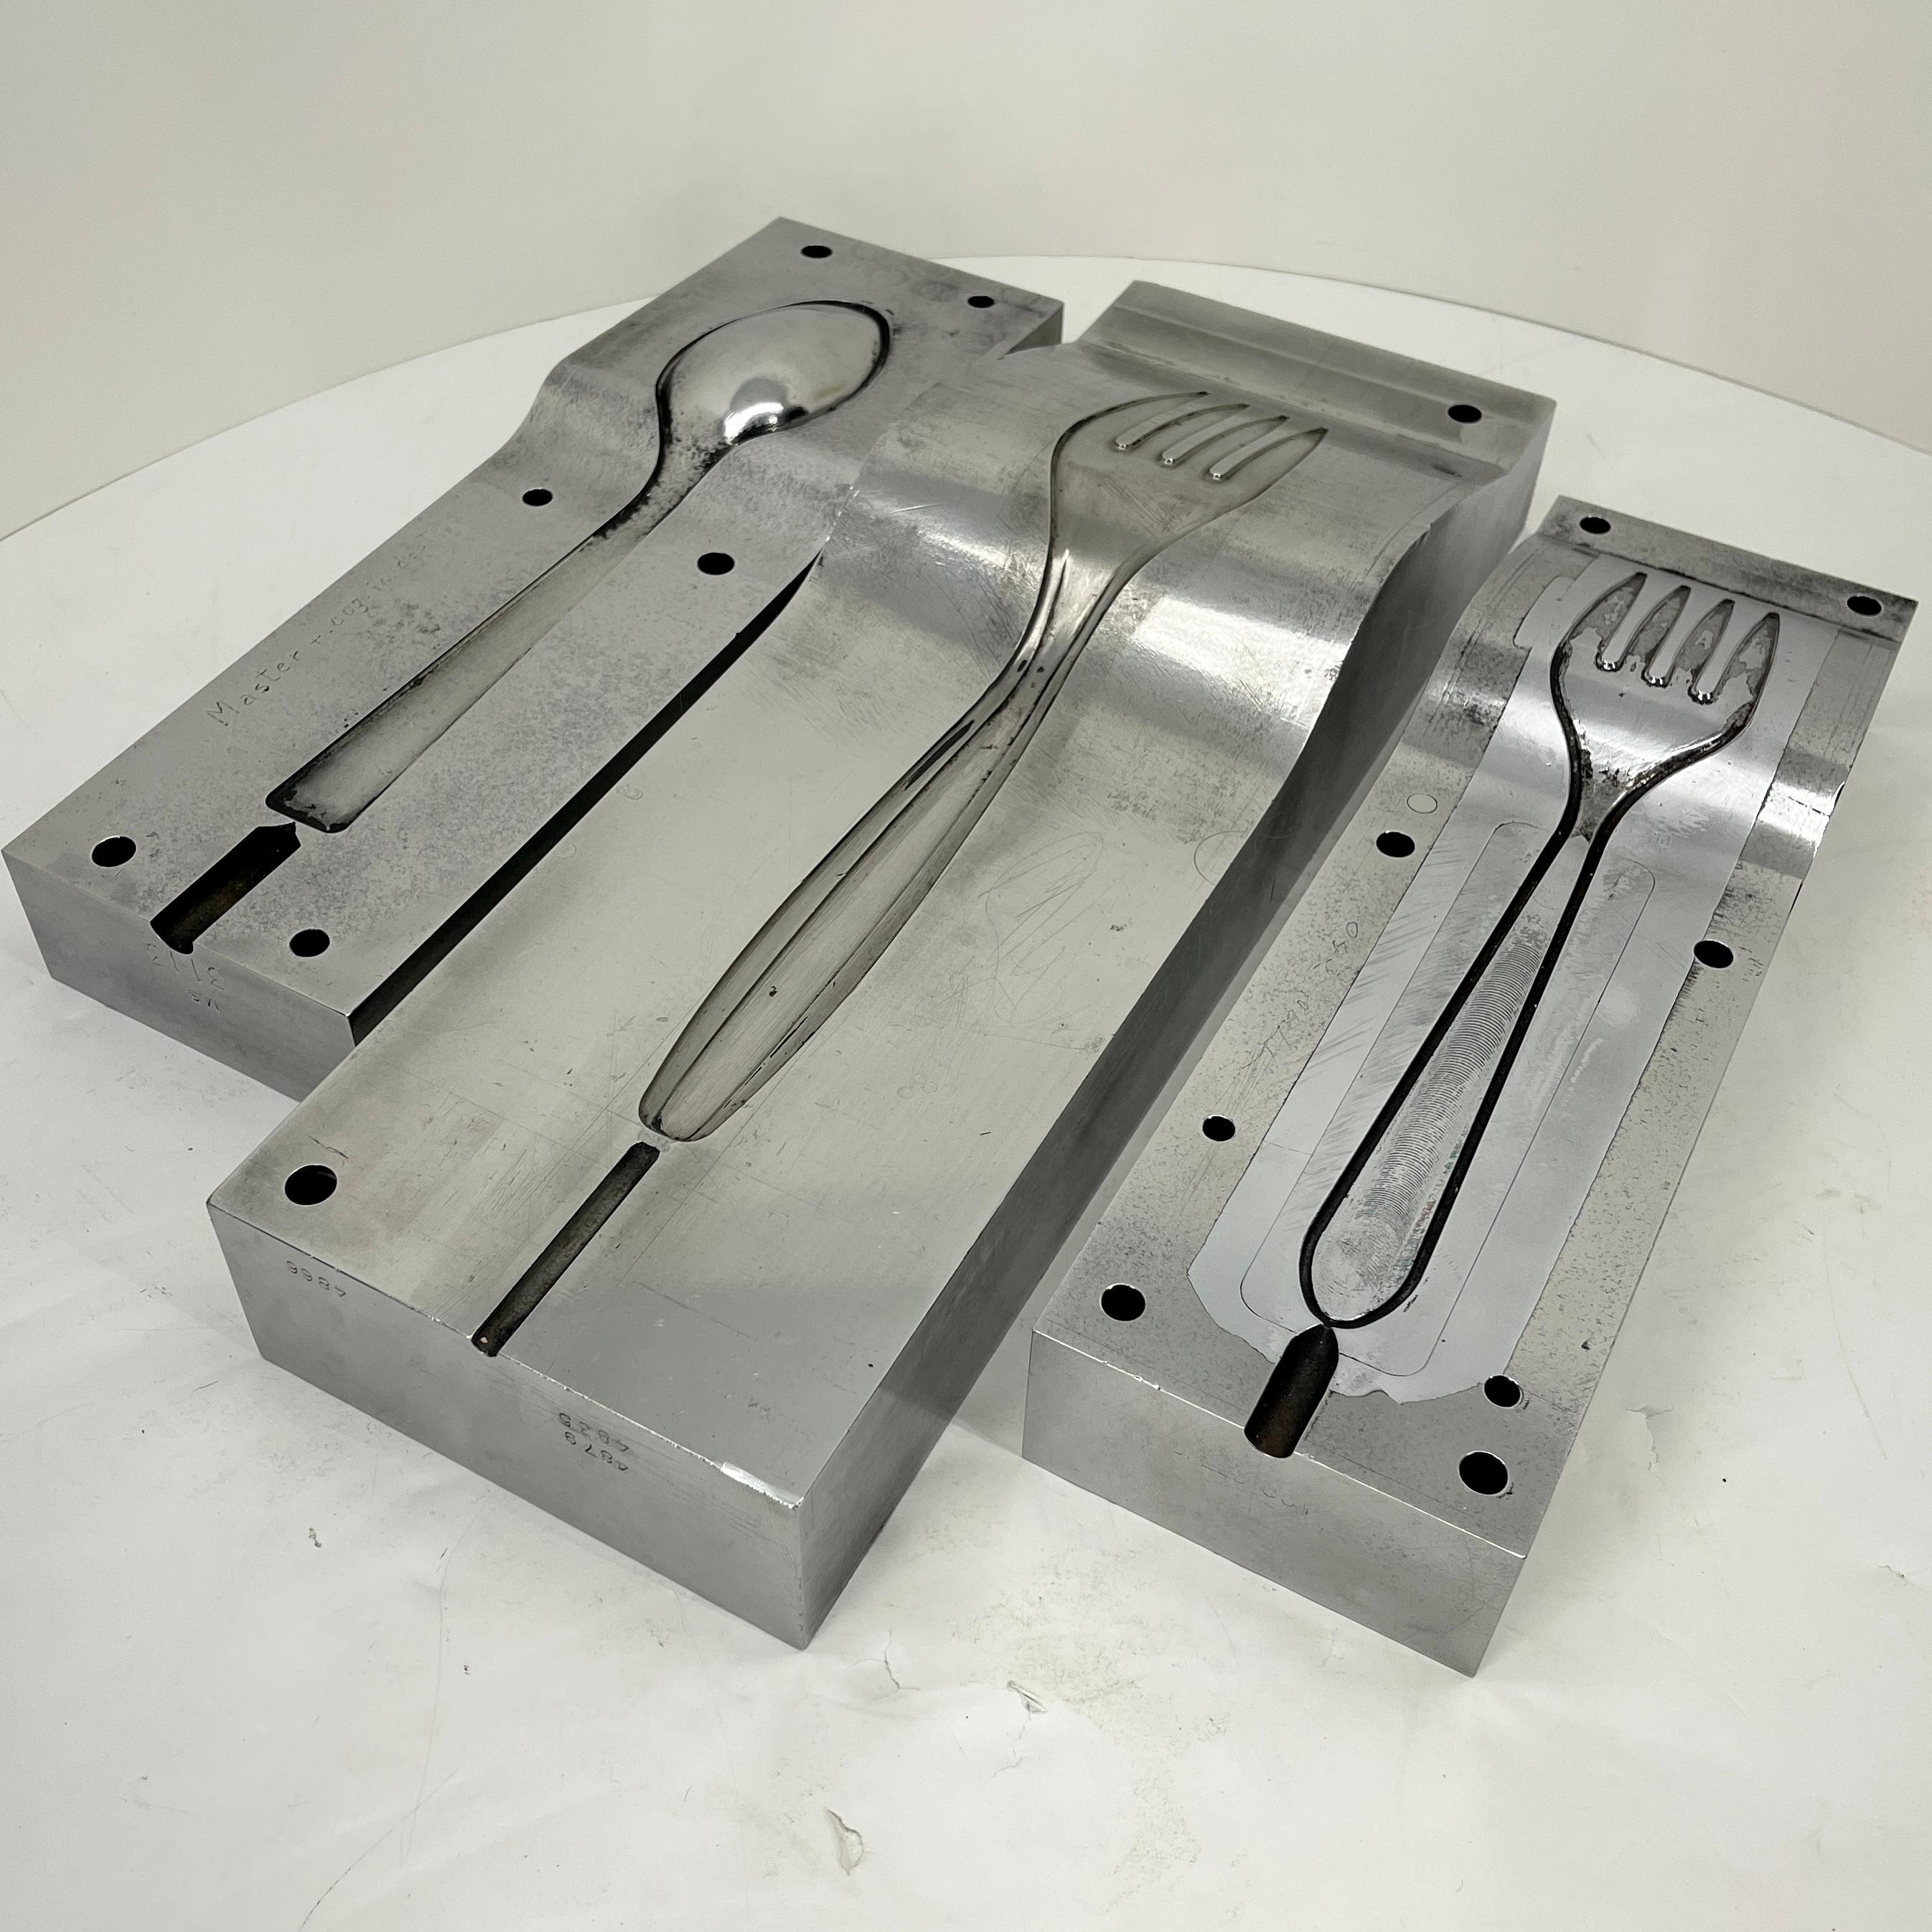 Two Stainless Steel Industrial Mold Sculptures for Silverware and Serveware 14